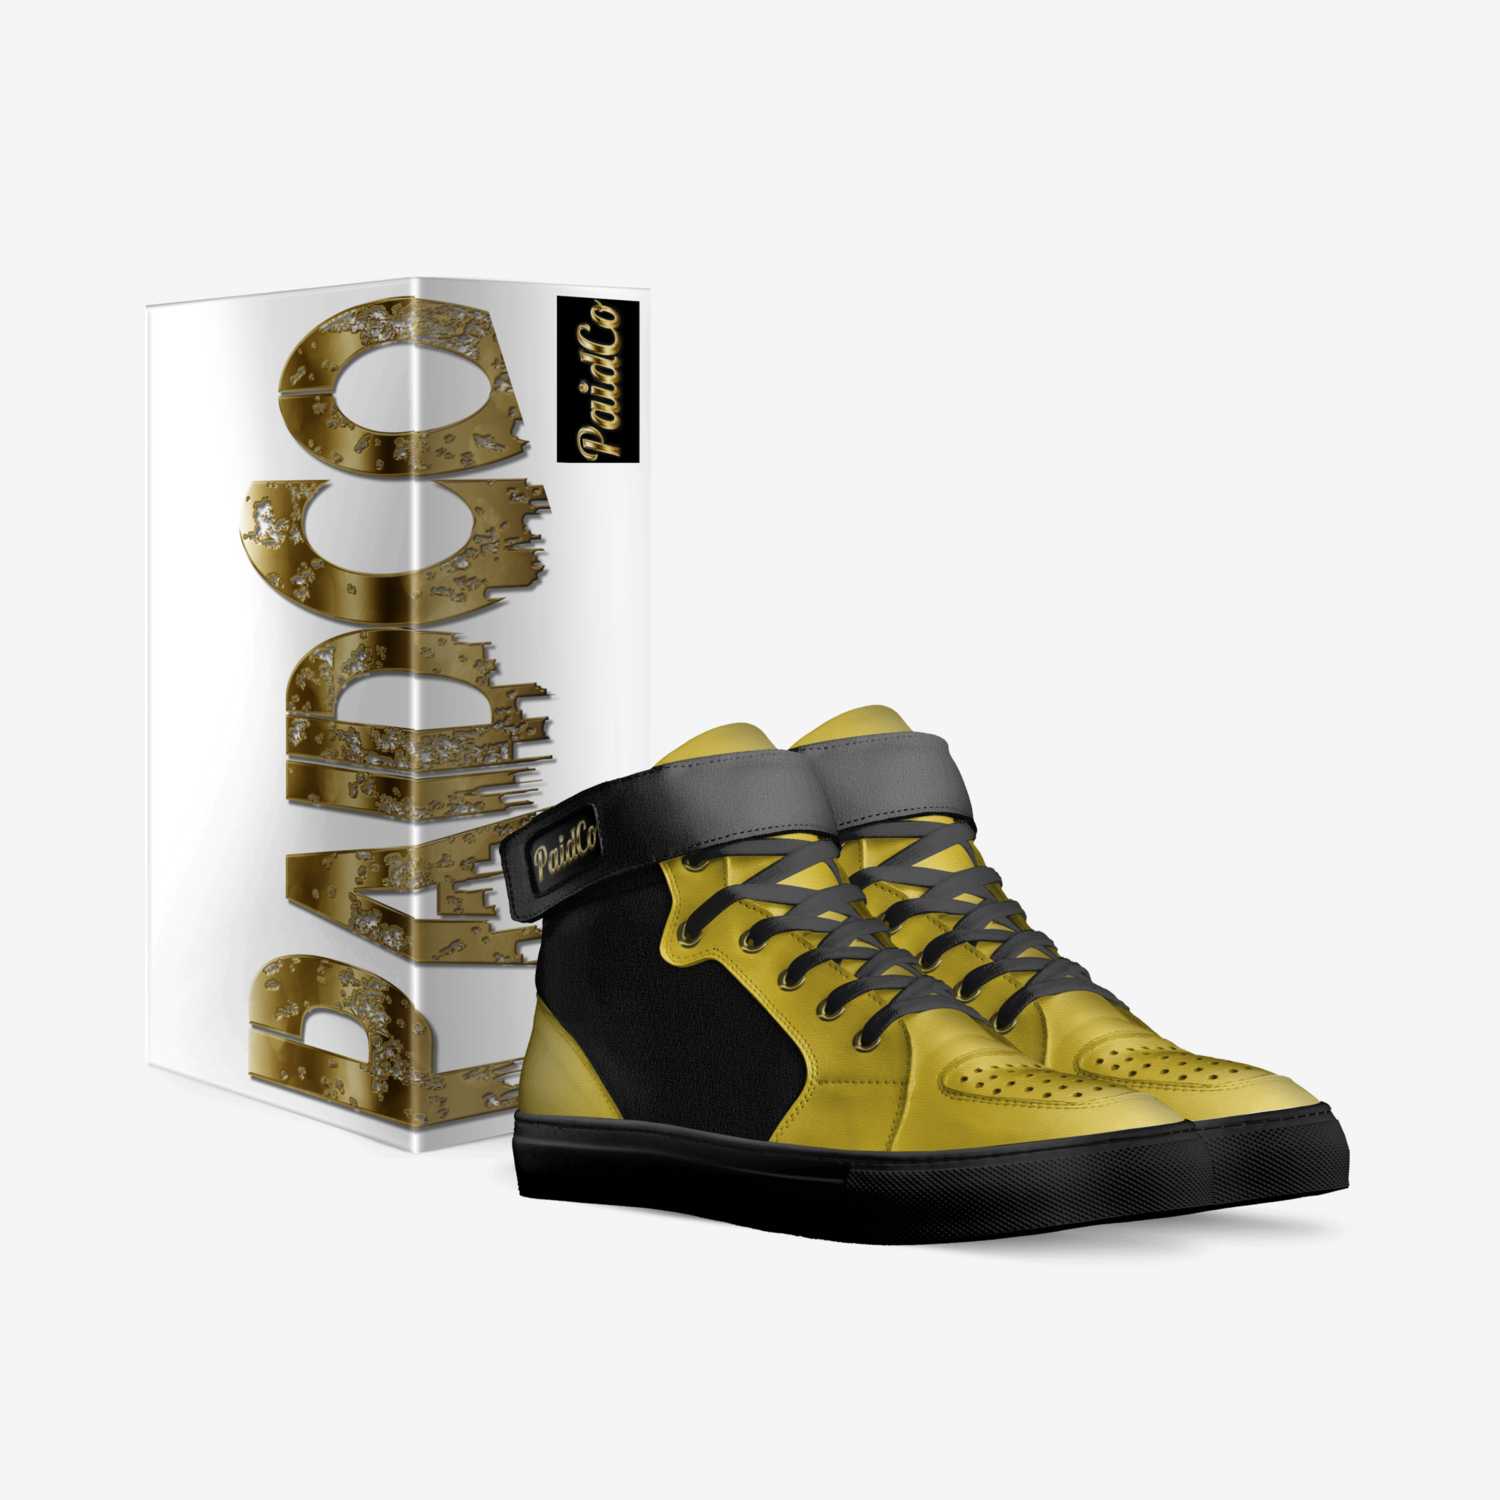 PaidCo custom made in Italy shoes by Jesus L. Pagan | Box view